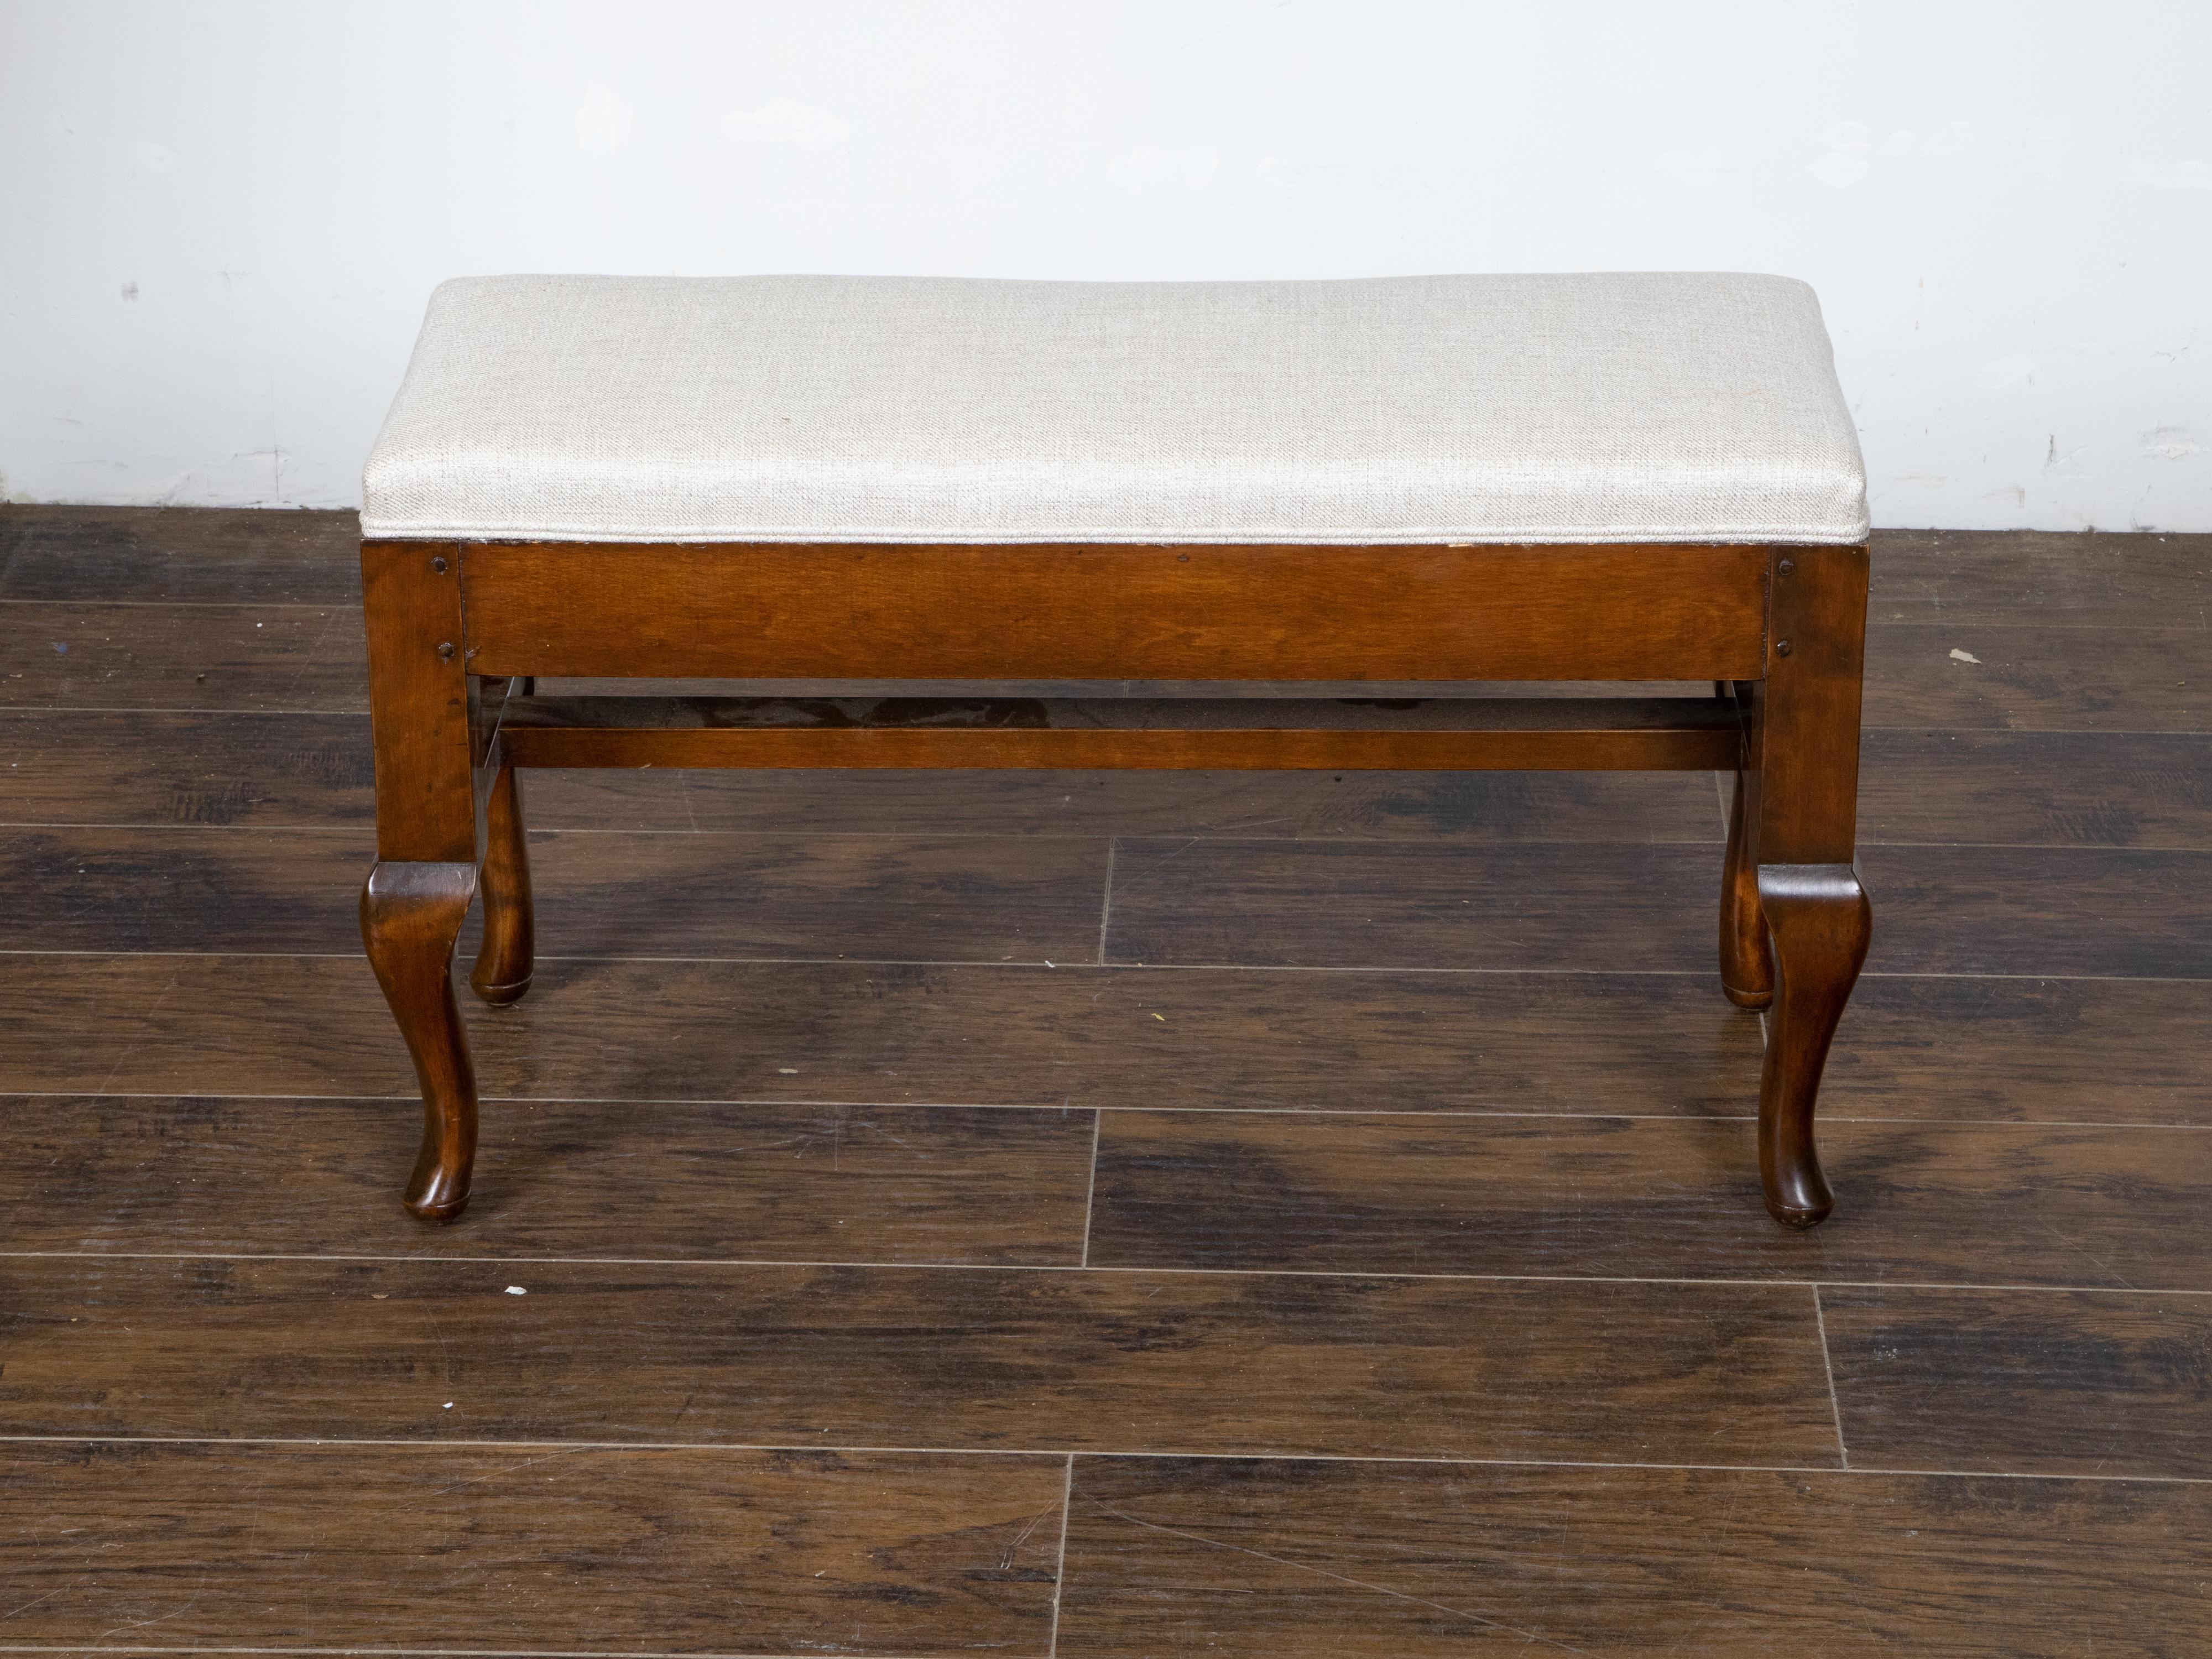 19th Century Small French 1800s Wood Bench with Curving Legs, Cross Stretcher and Upholstery